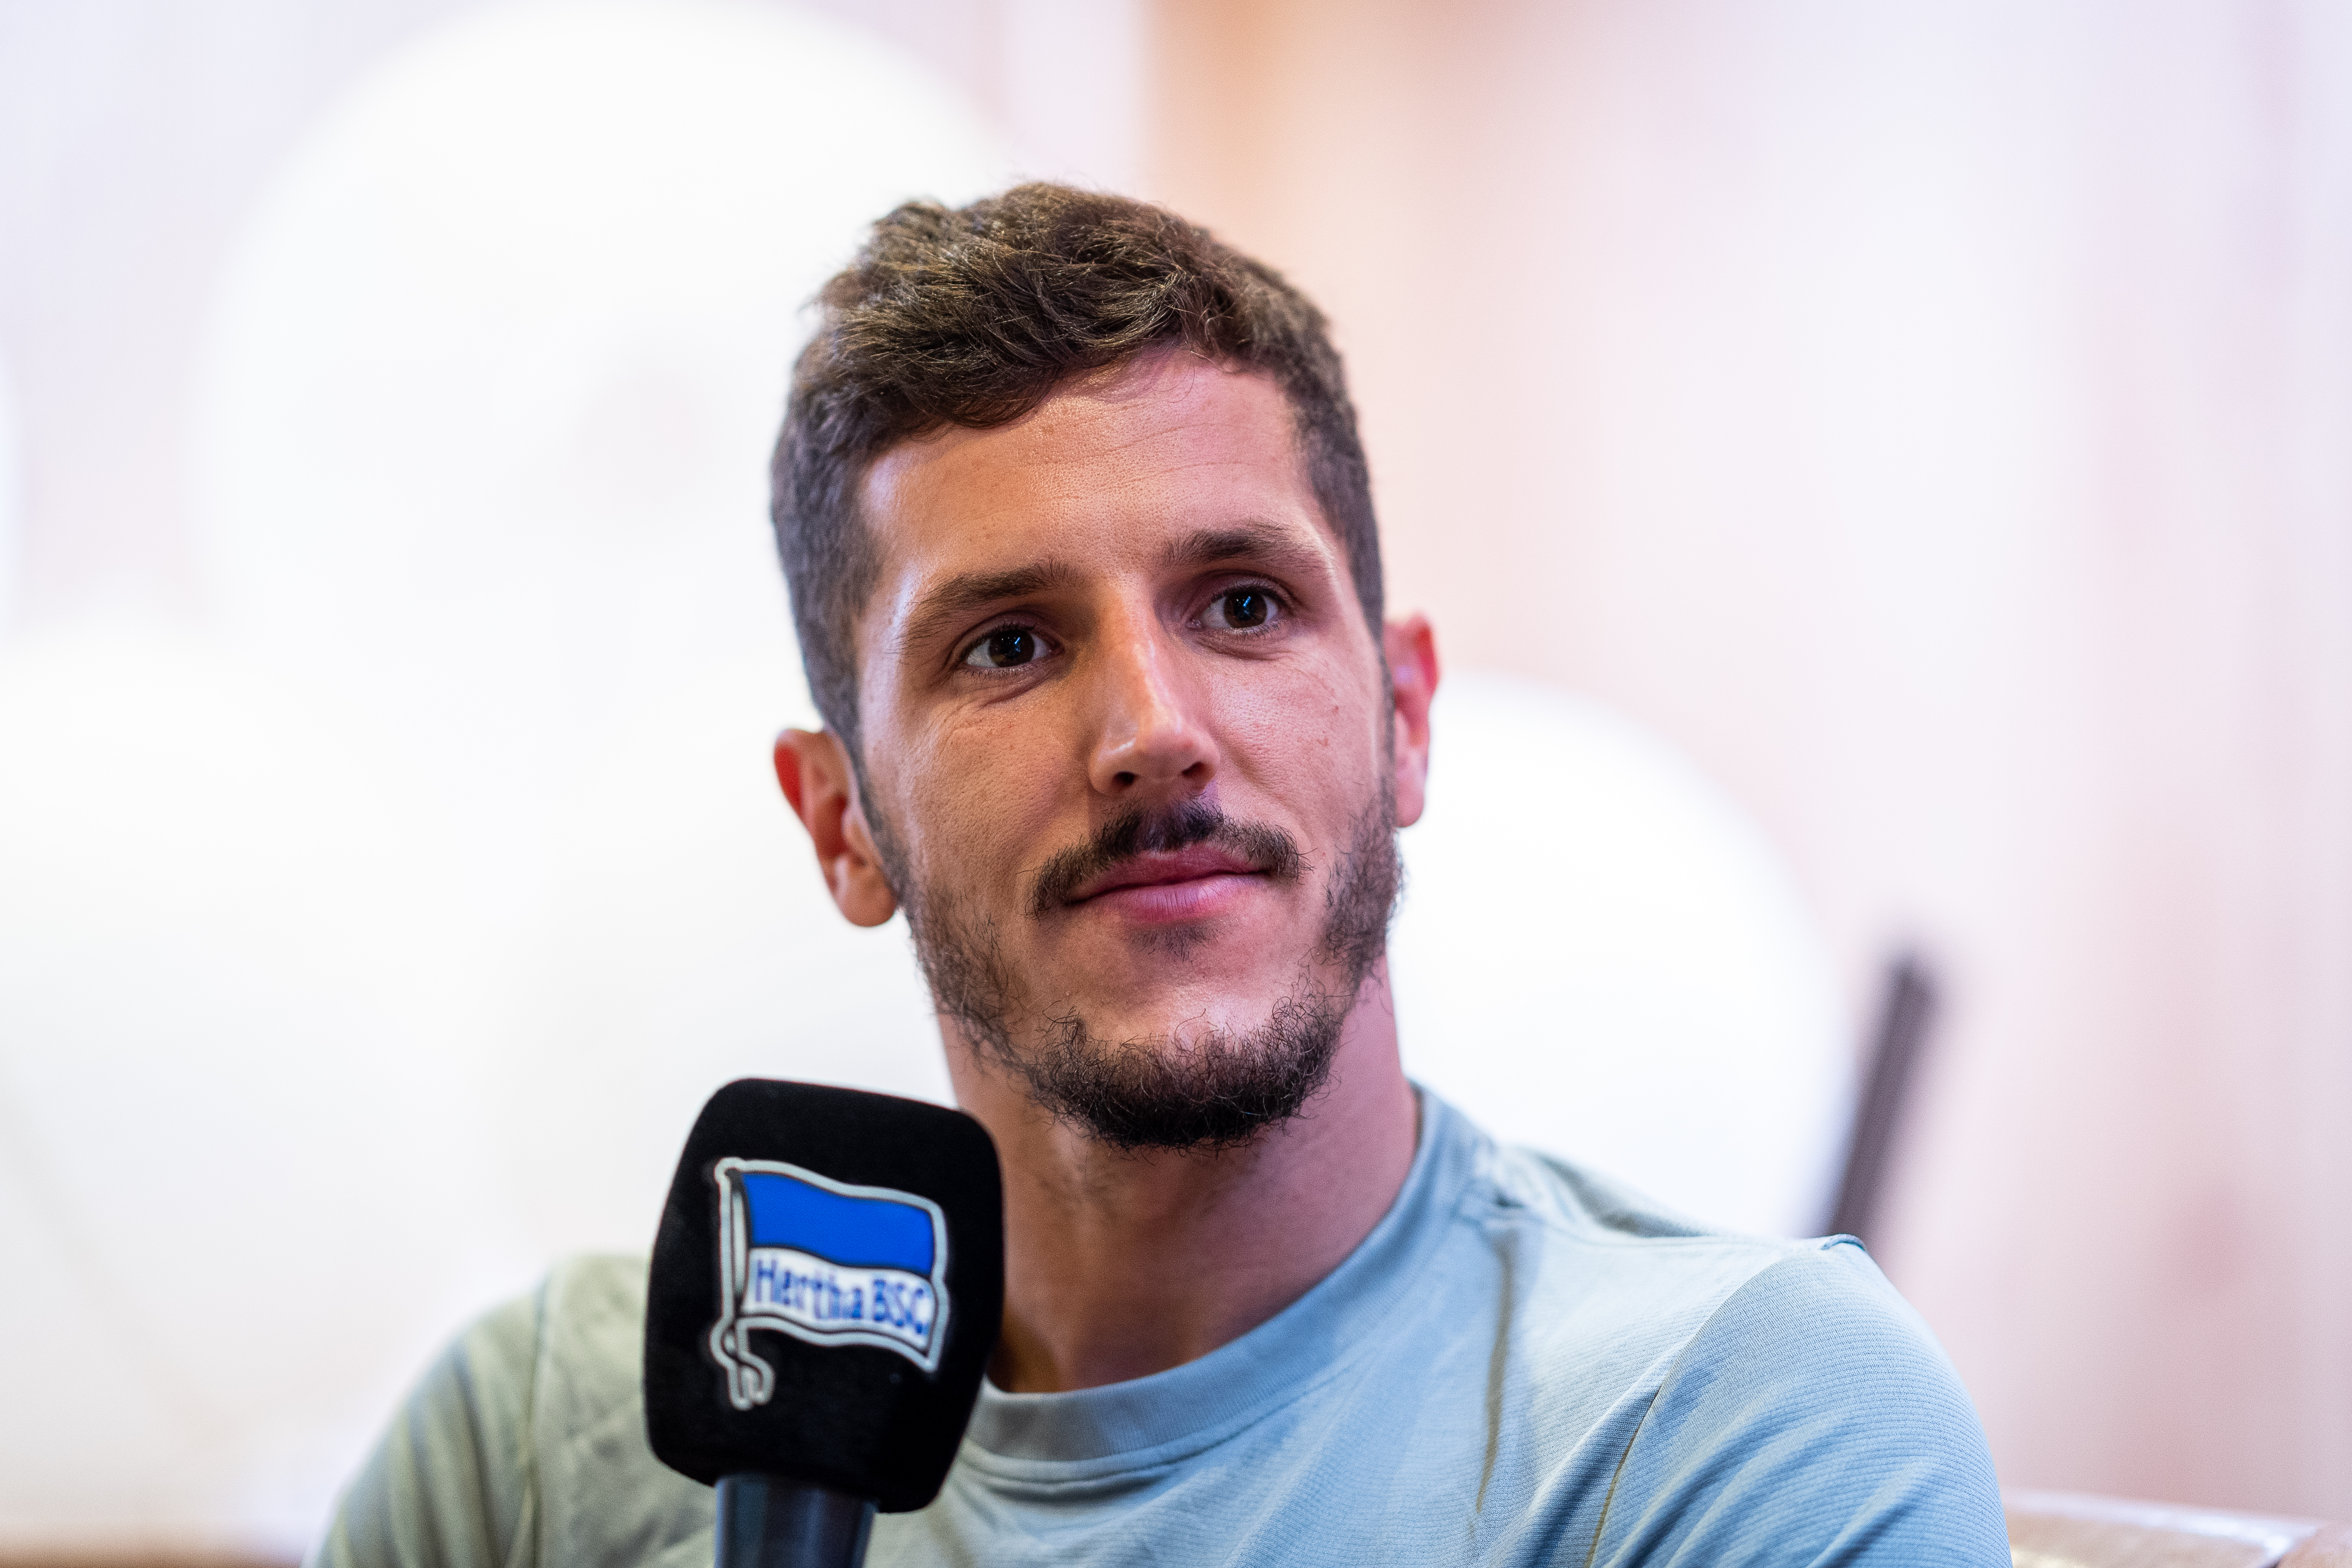 New arrival Stevan Jovetić sits down for a first interview.